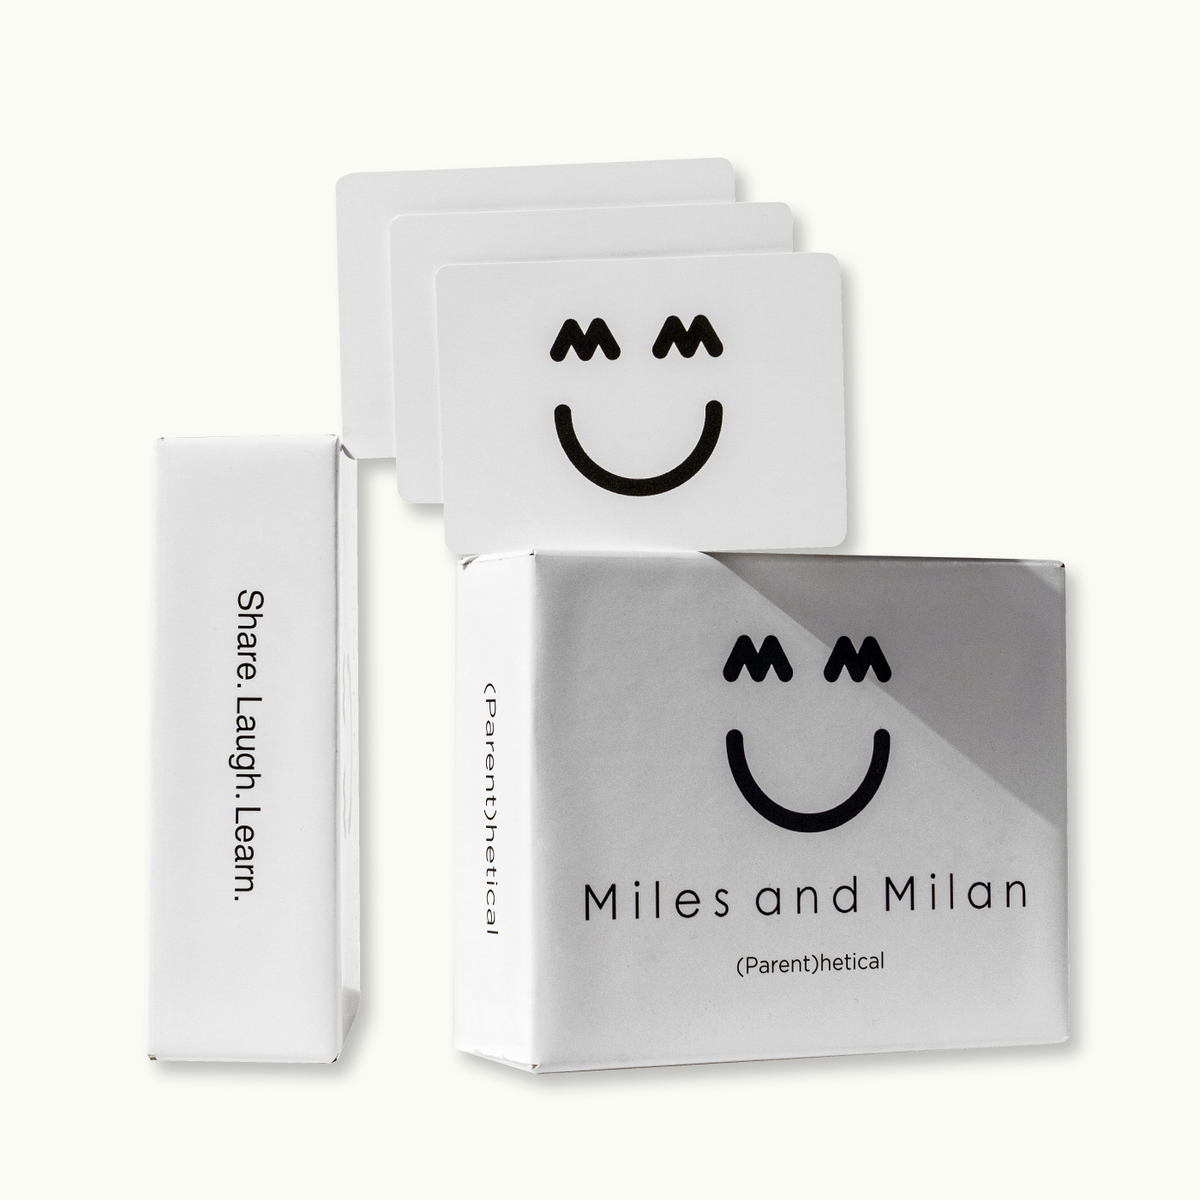 Miles and Milan (Parent)hetical - Share. Laugh.Learn. card game packaging